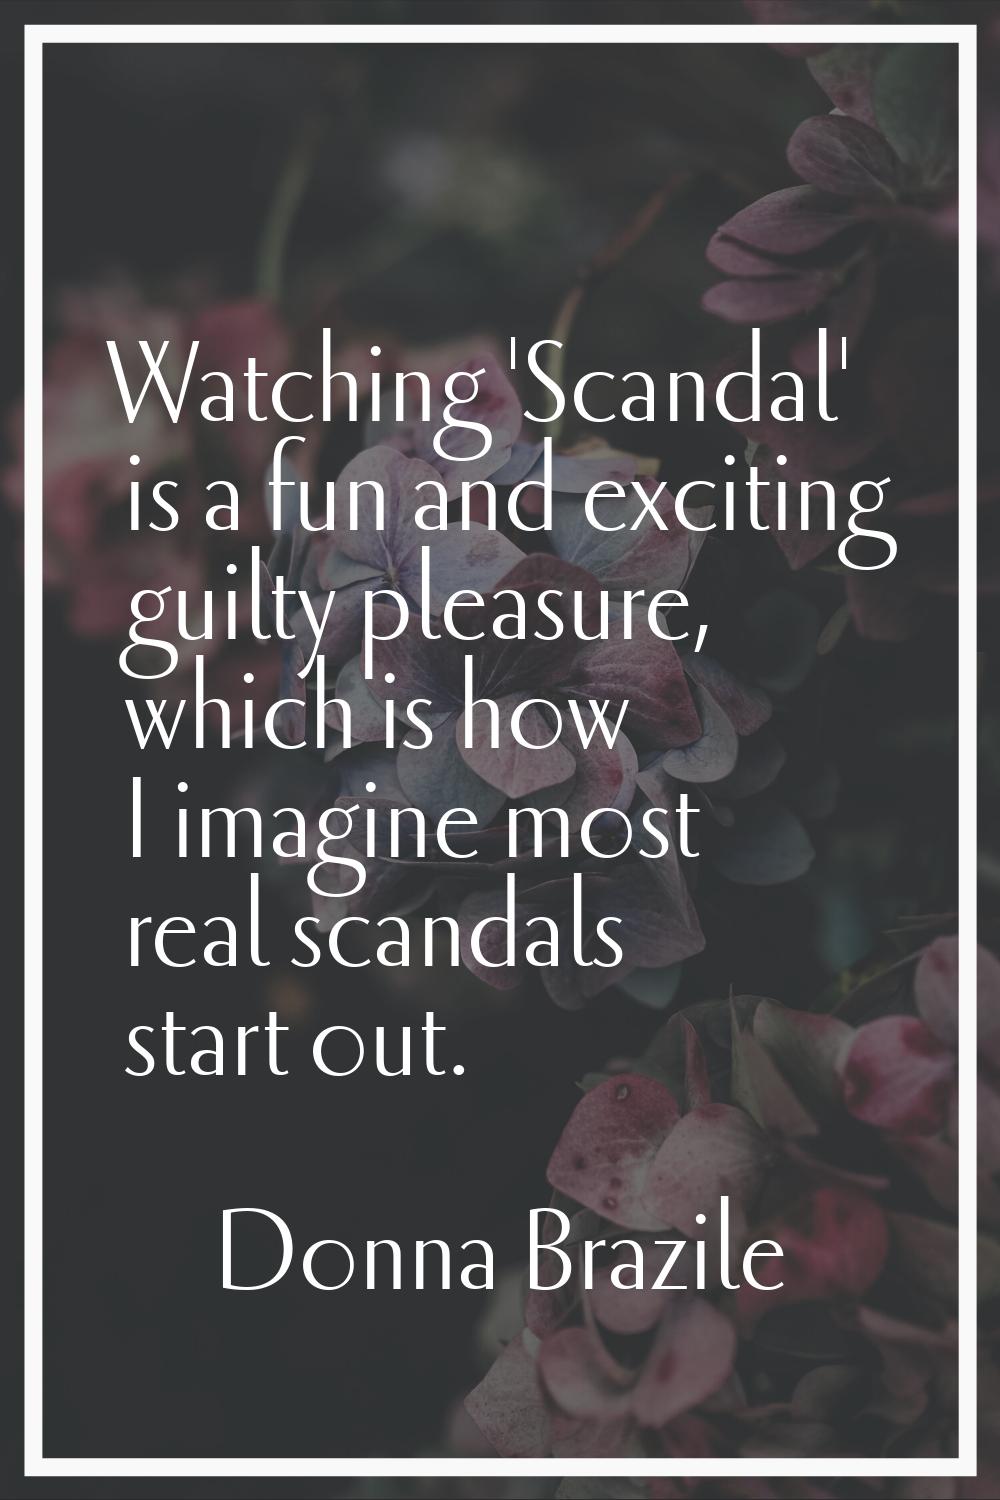 Watching 'Scandal' is a fun and exciting guilty pleasure, which is how I imagine most real scandals